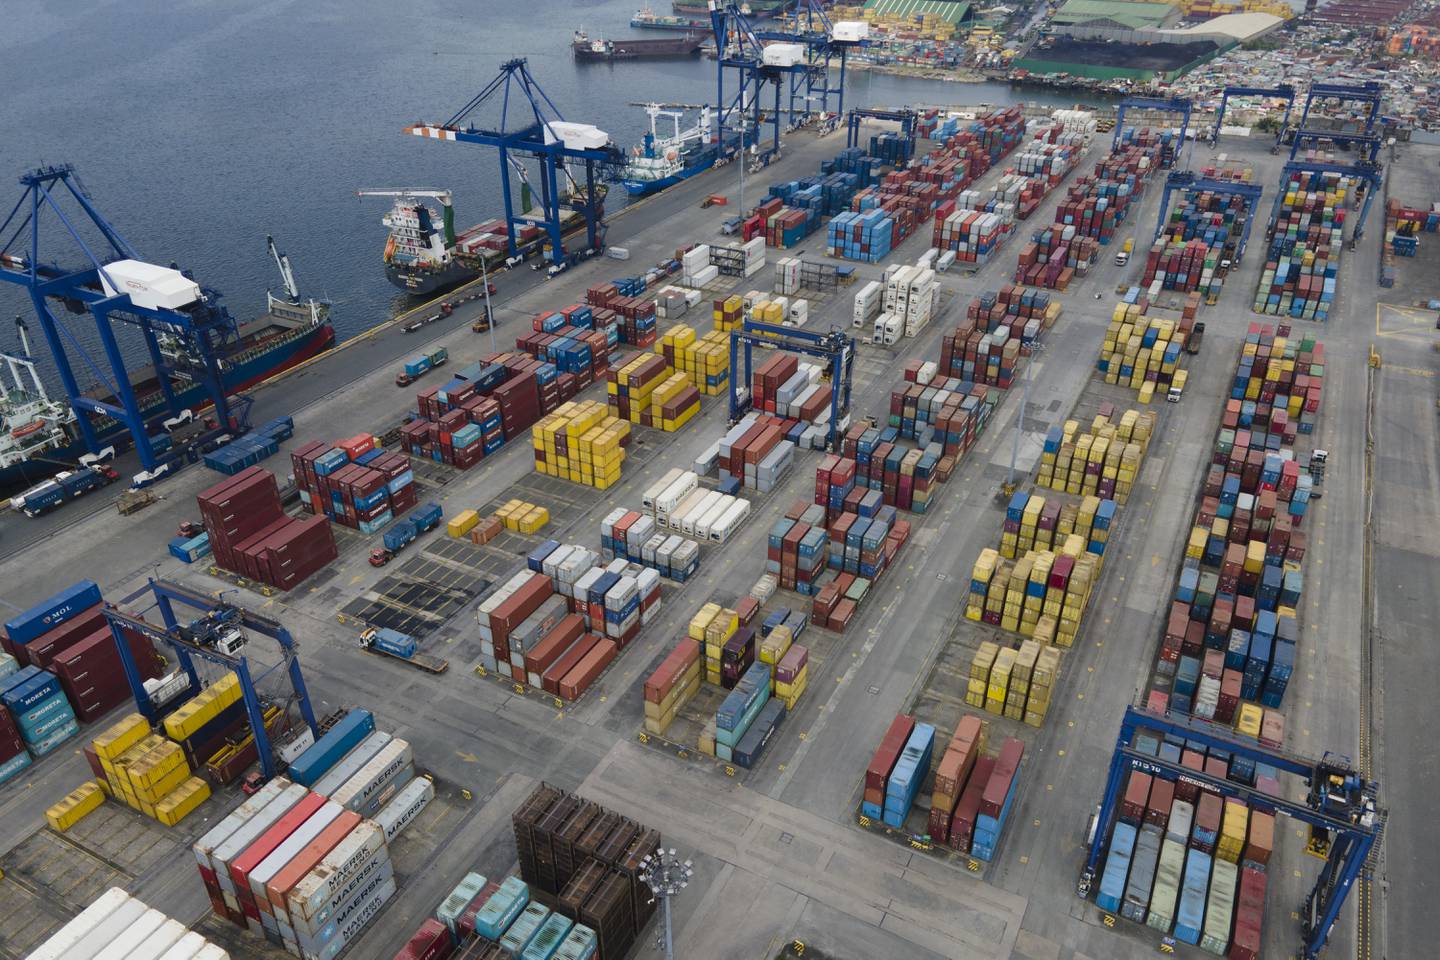 The Covid-induced acute supply chain blockages have led to congestion and delays at ports. AP